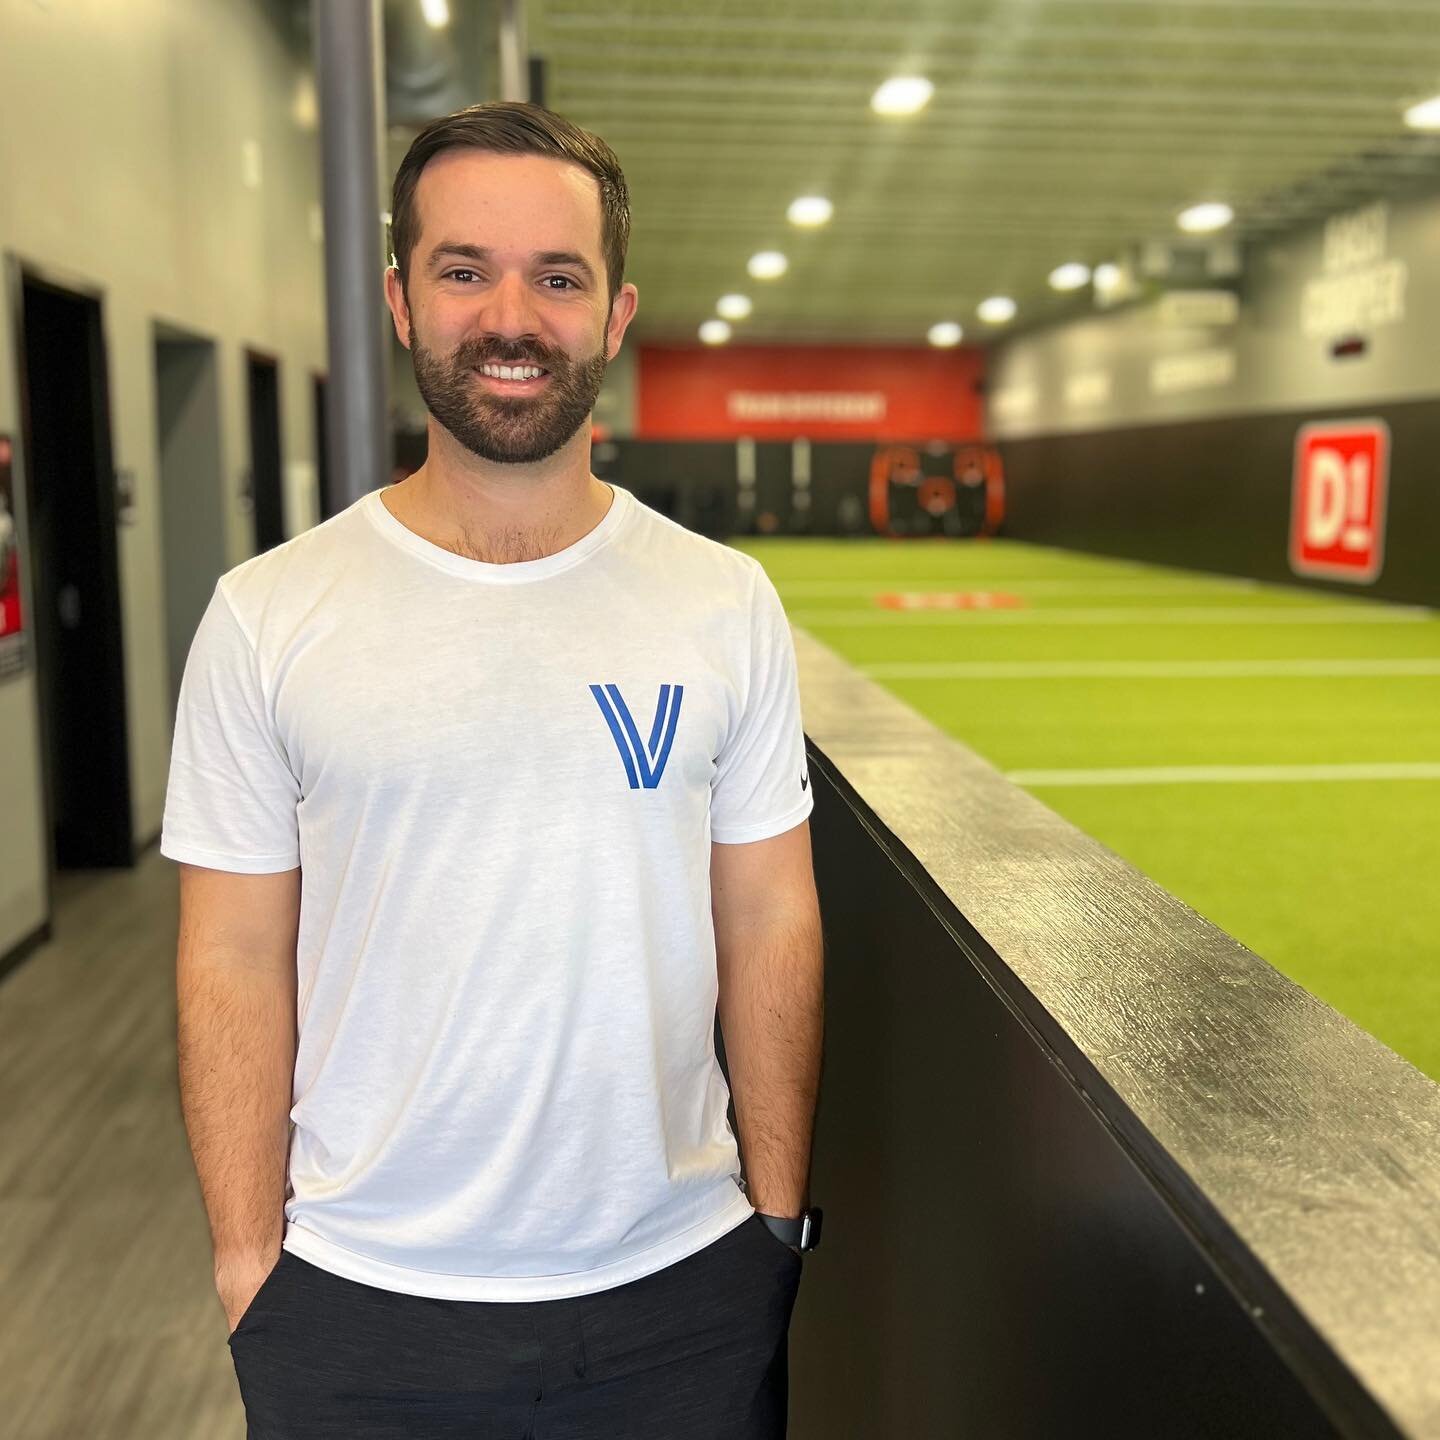 MEET THE TEAM

With a few new faces here on the profile, we figured it would be a good time to reintroduce the people behind the business!

Dr. Nathan &ldquo;Nate&rdquo; Harris is the owner and founder of Velocity Sports Physical Therapy. Dr. Nate is